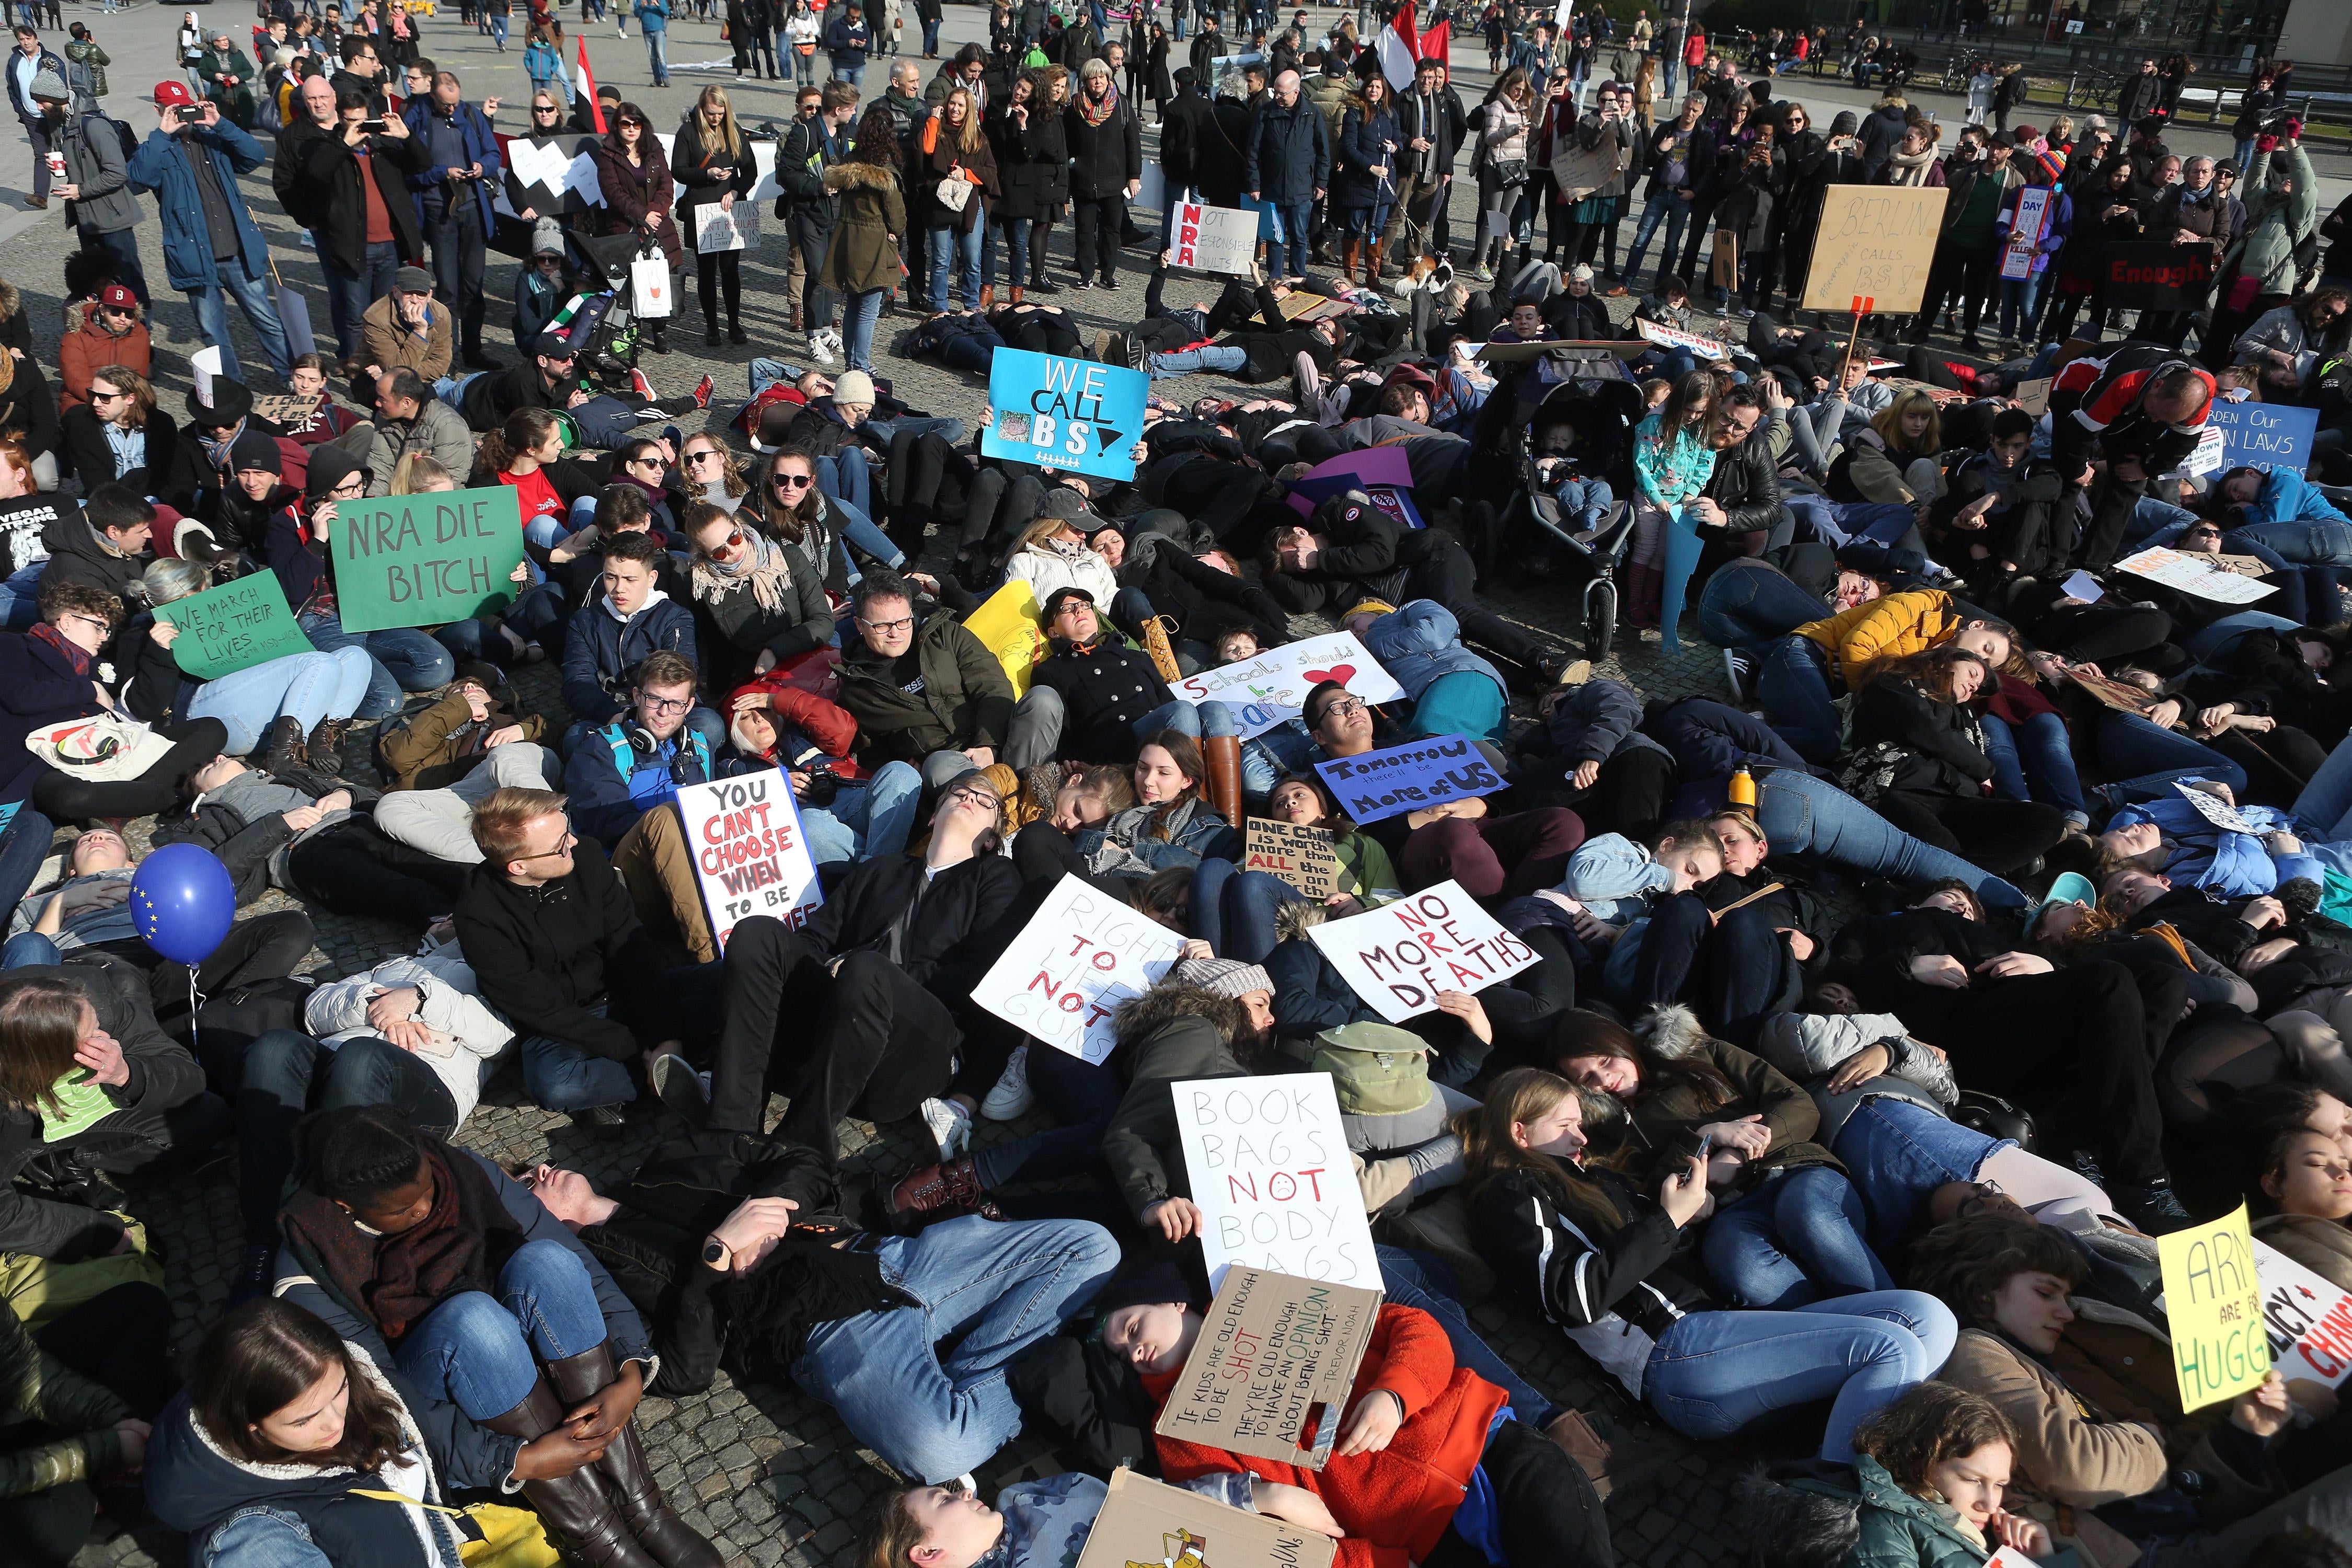 Demonstrators lay on the ground in protest at the March for Our Lives demonstration on March 24, 2018 in Berlin, Germany. 